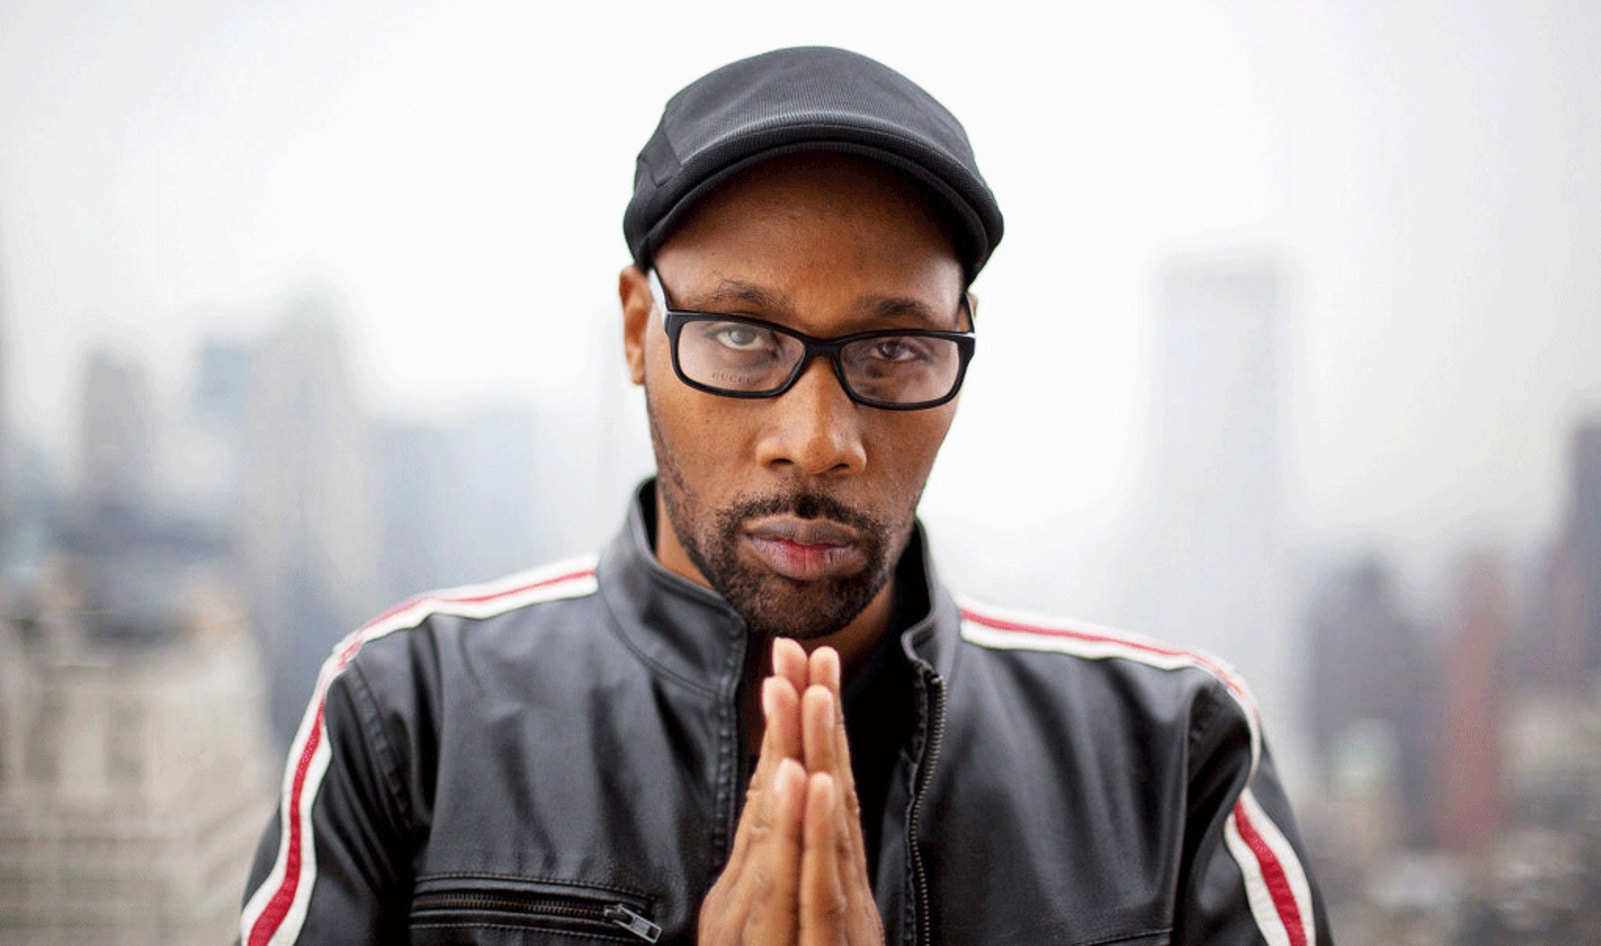 Wu-Tang’s RZA to Joe Rogan: “No Animal Needs to Die for Me to Live”&nbsp;